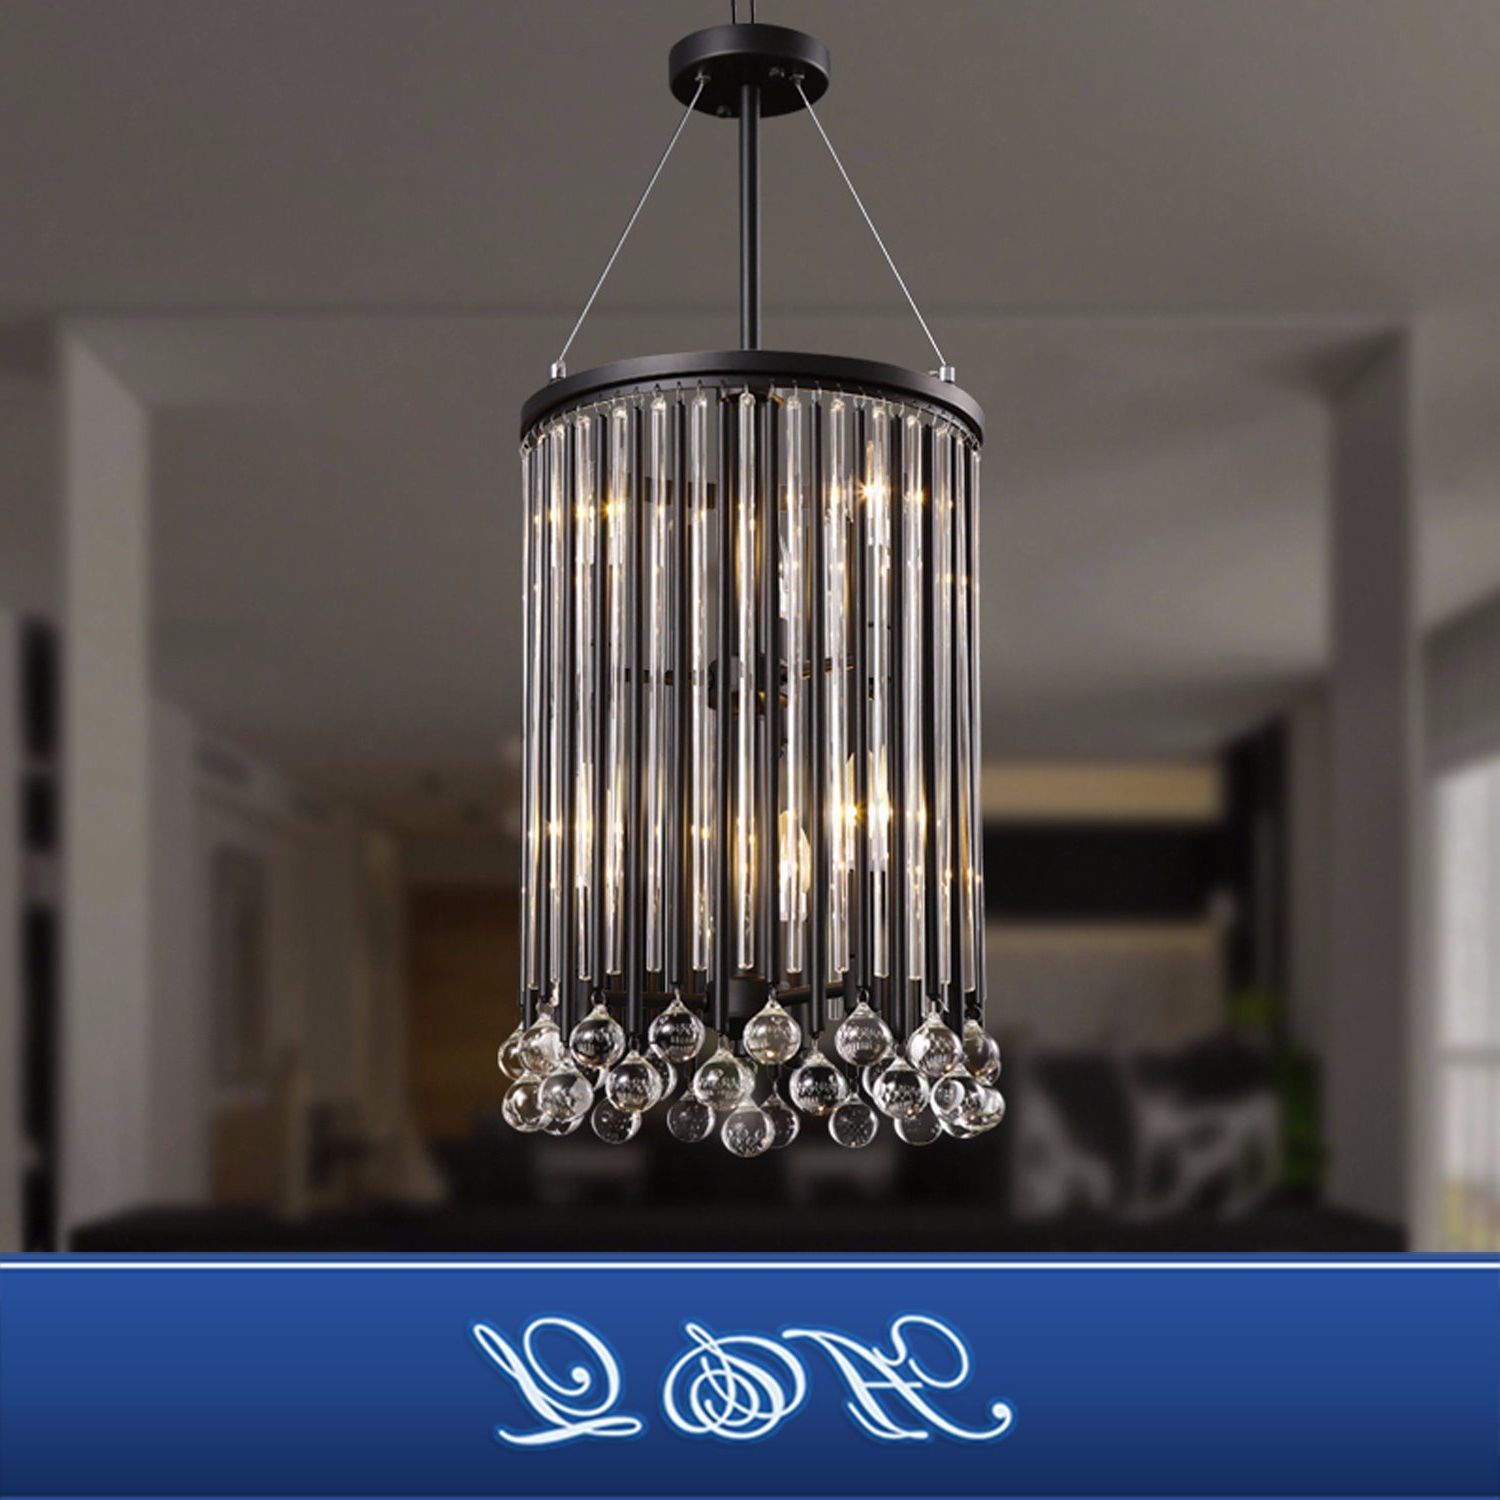 [%[hot Item] Modern Design Drum Style Crystal Chandelier For Living Room For Best And Newest Dailey 4 Light Drum Chandeliers|dailey 4 Light Drum Chandeliers Intended For Trendy [hot Item] Modern Design Drum Style Crystal Chandelier For Living Room|newest Dailey 4 Light Drum Chandeliers For [hot Item] Modern Design Drum Style Crystal Chandelier For Living Room|fashionable [hot Item] Modern Design Drum Style Crystal Chandelier For Living Room Intended For Dailey 4 Light Drum Chandeliers%] (View 25 of 25)